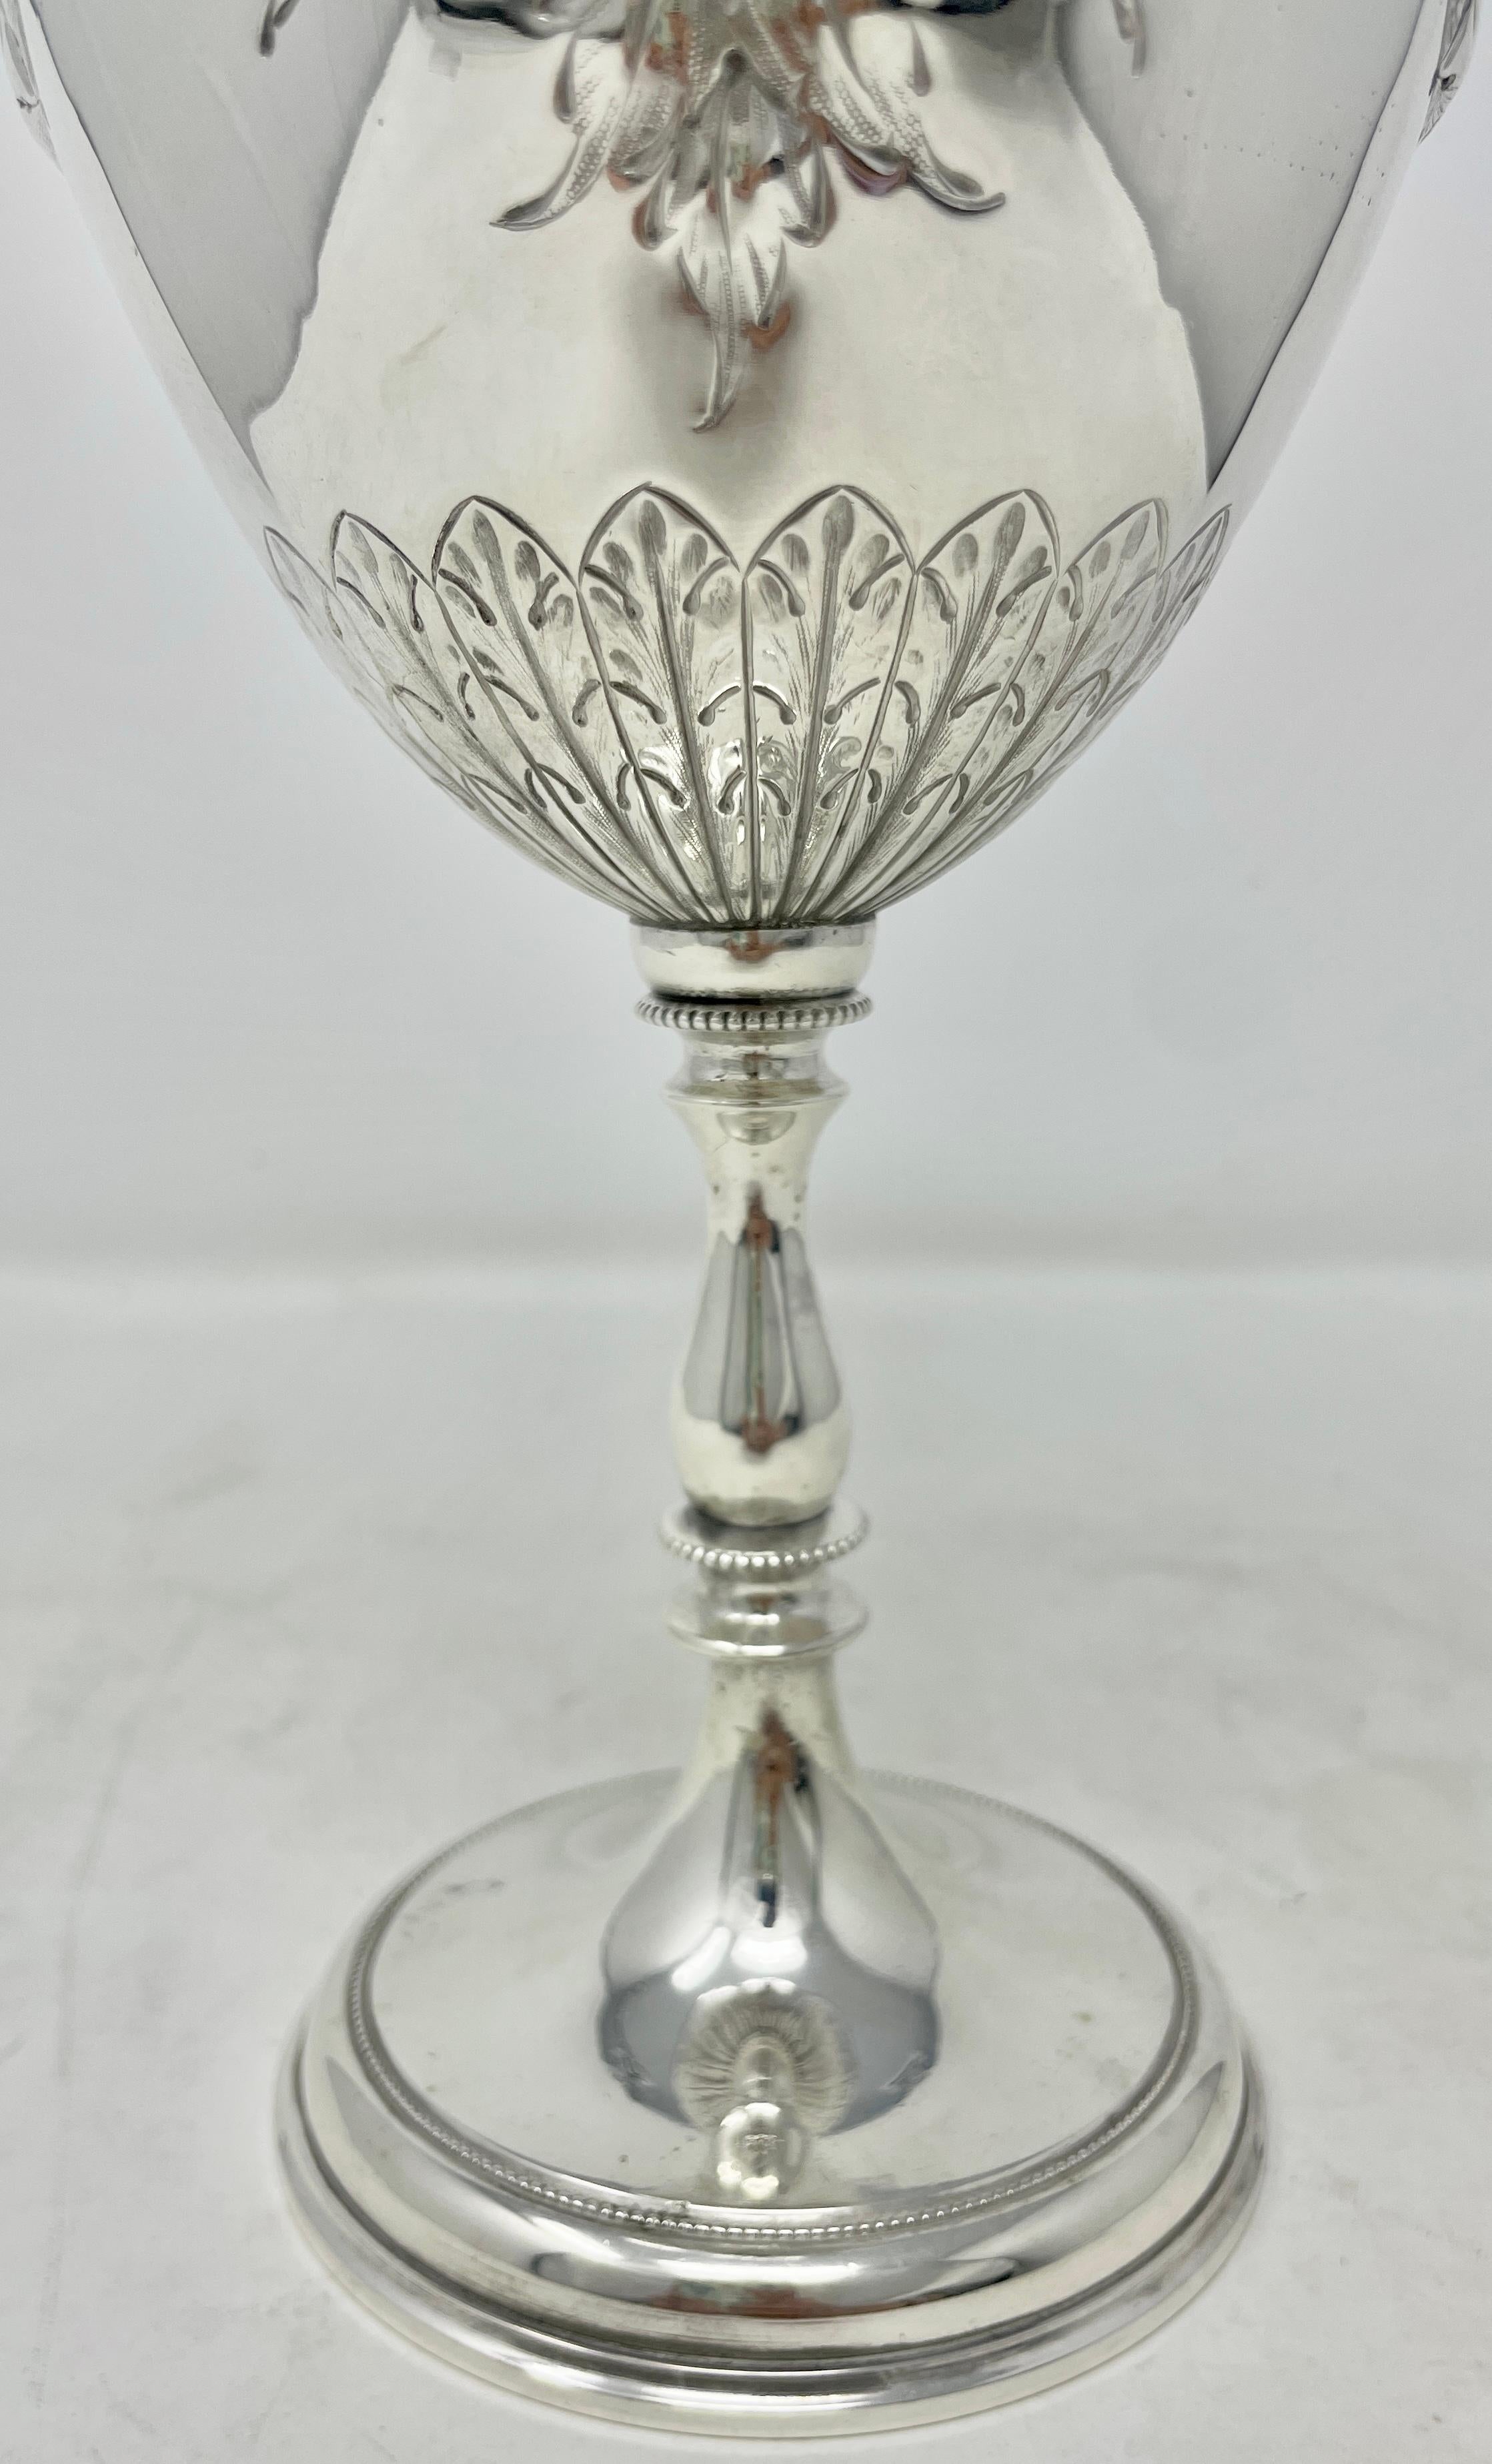 20th Century Antique English Victorian Chased Silver-Plated Goblet, Circa 1900.